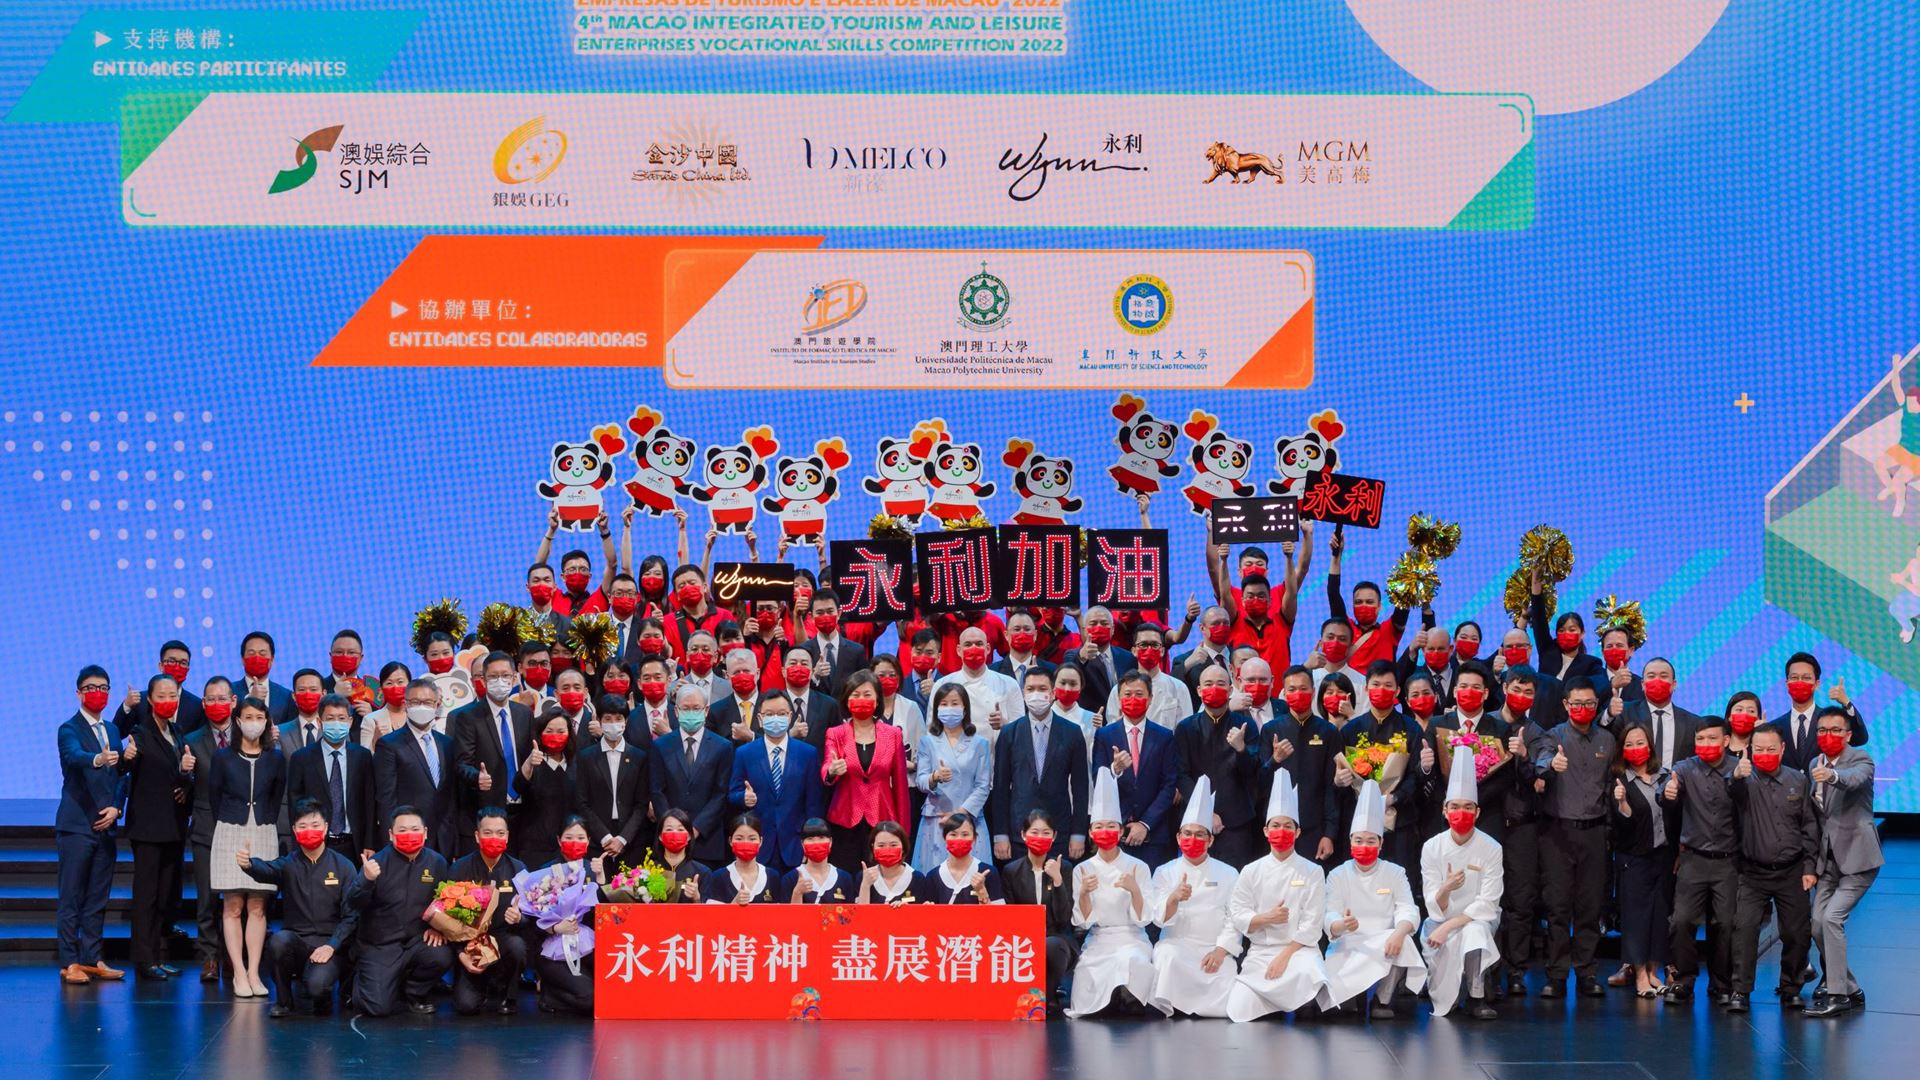 Wynn wins nine awards at the 4th Macao Integrated Tourism and Leisure Enterprise Vocational Skills Competition